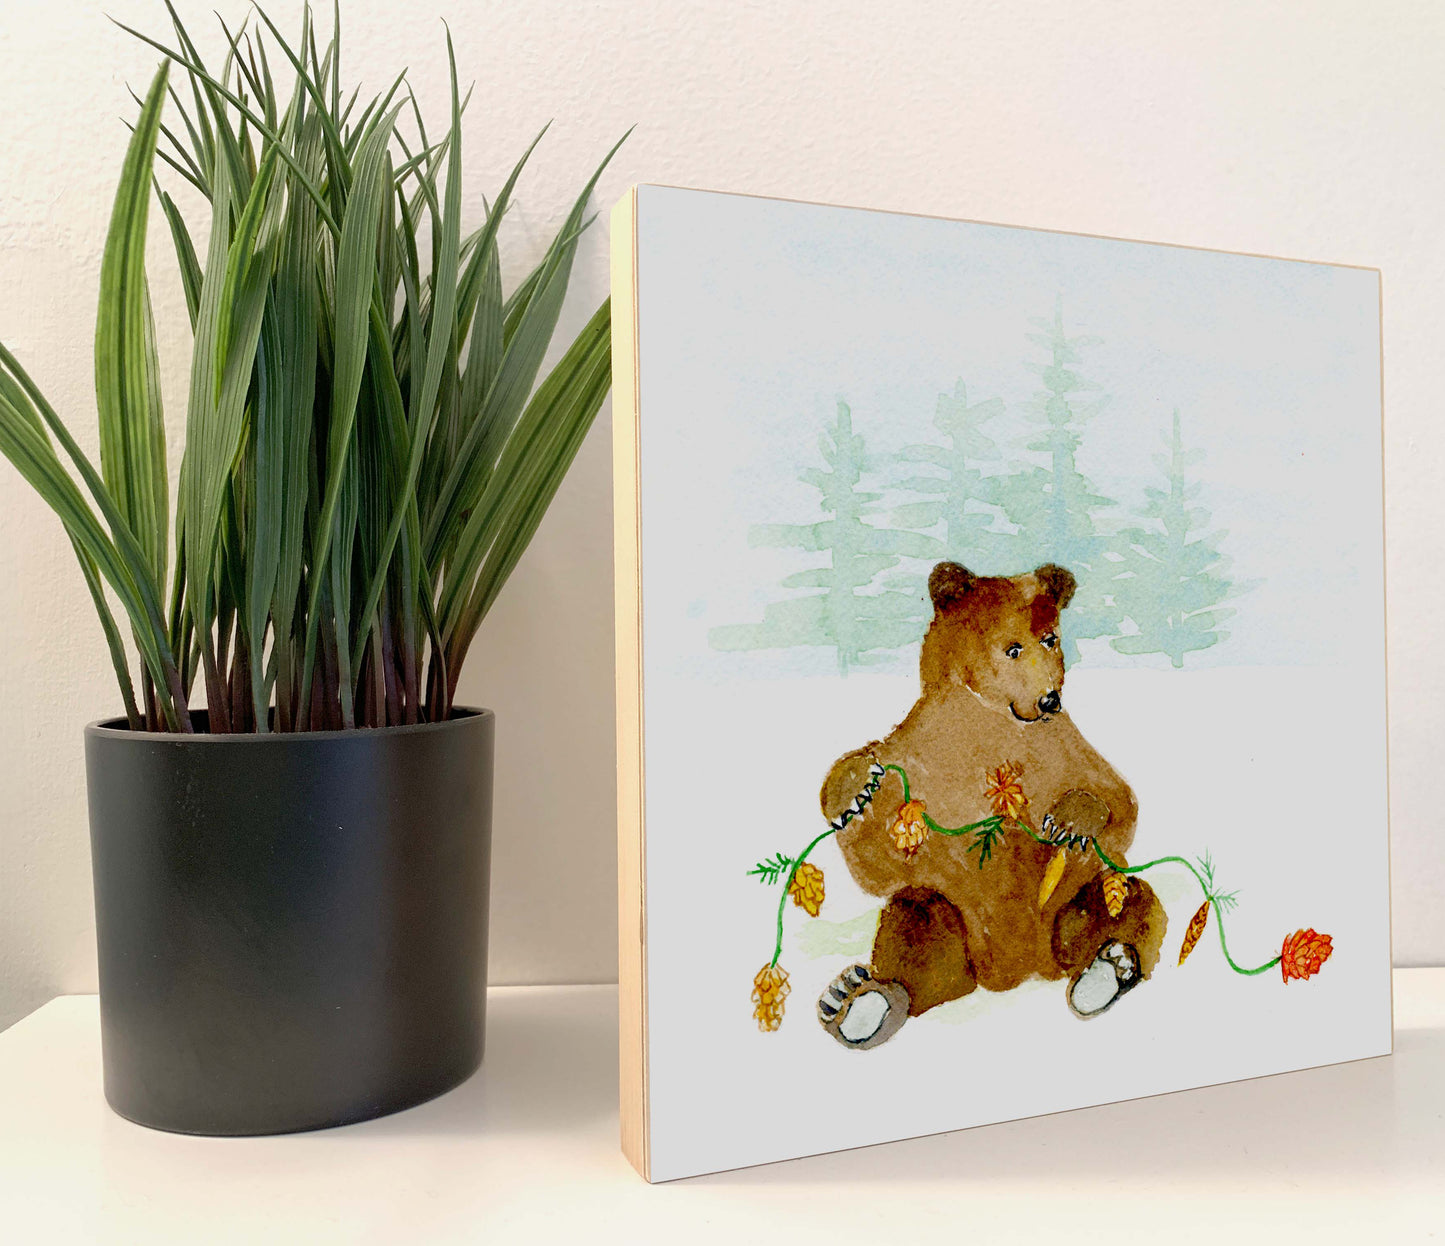 Woodland Animal Bear with Pinecones Print on 5x5 or 8x8 Wood Block. Nursery, Christmas - Flamingo Shores - Original Art for Home Decor and Gifts